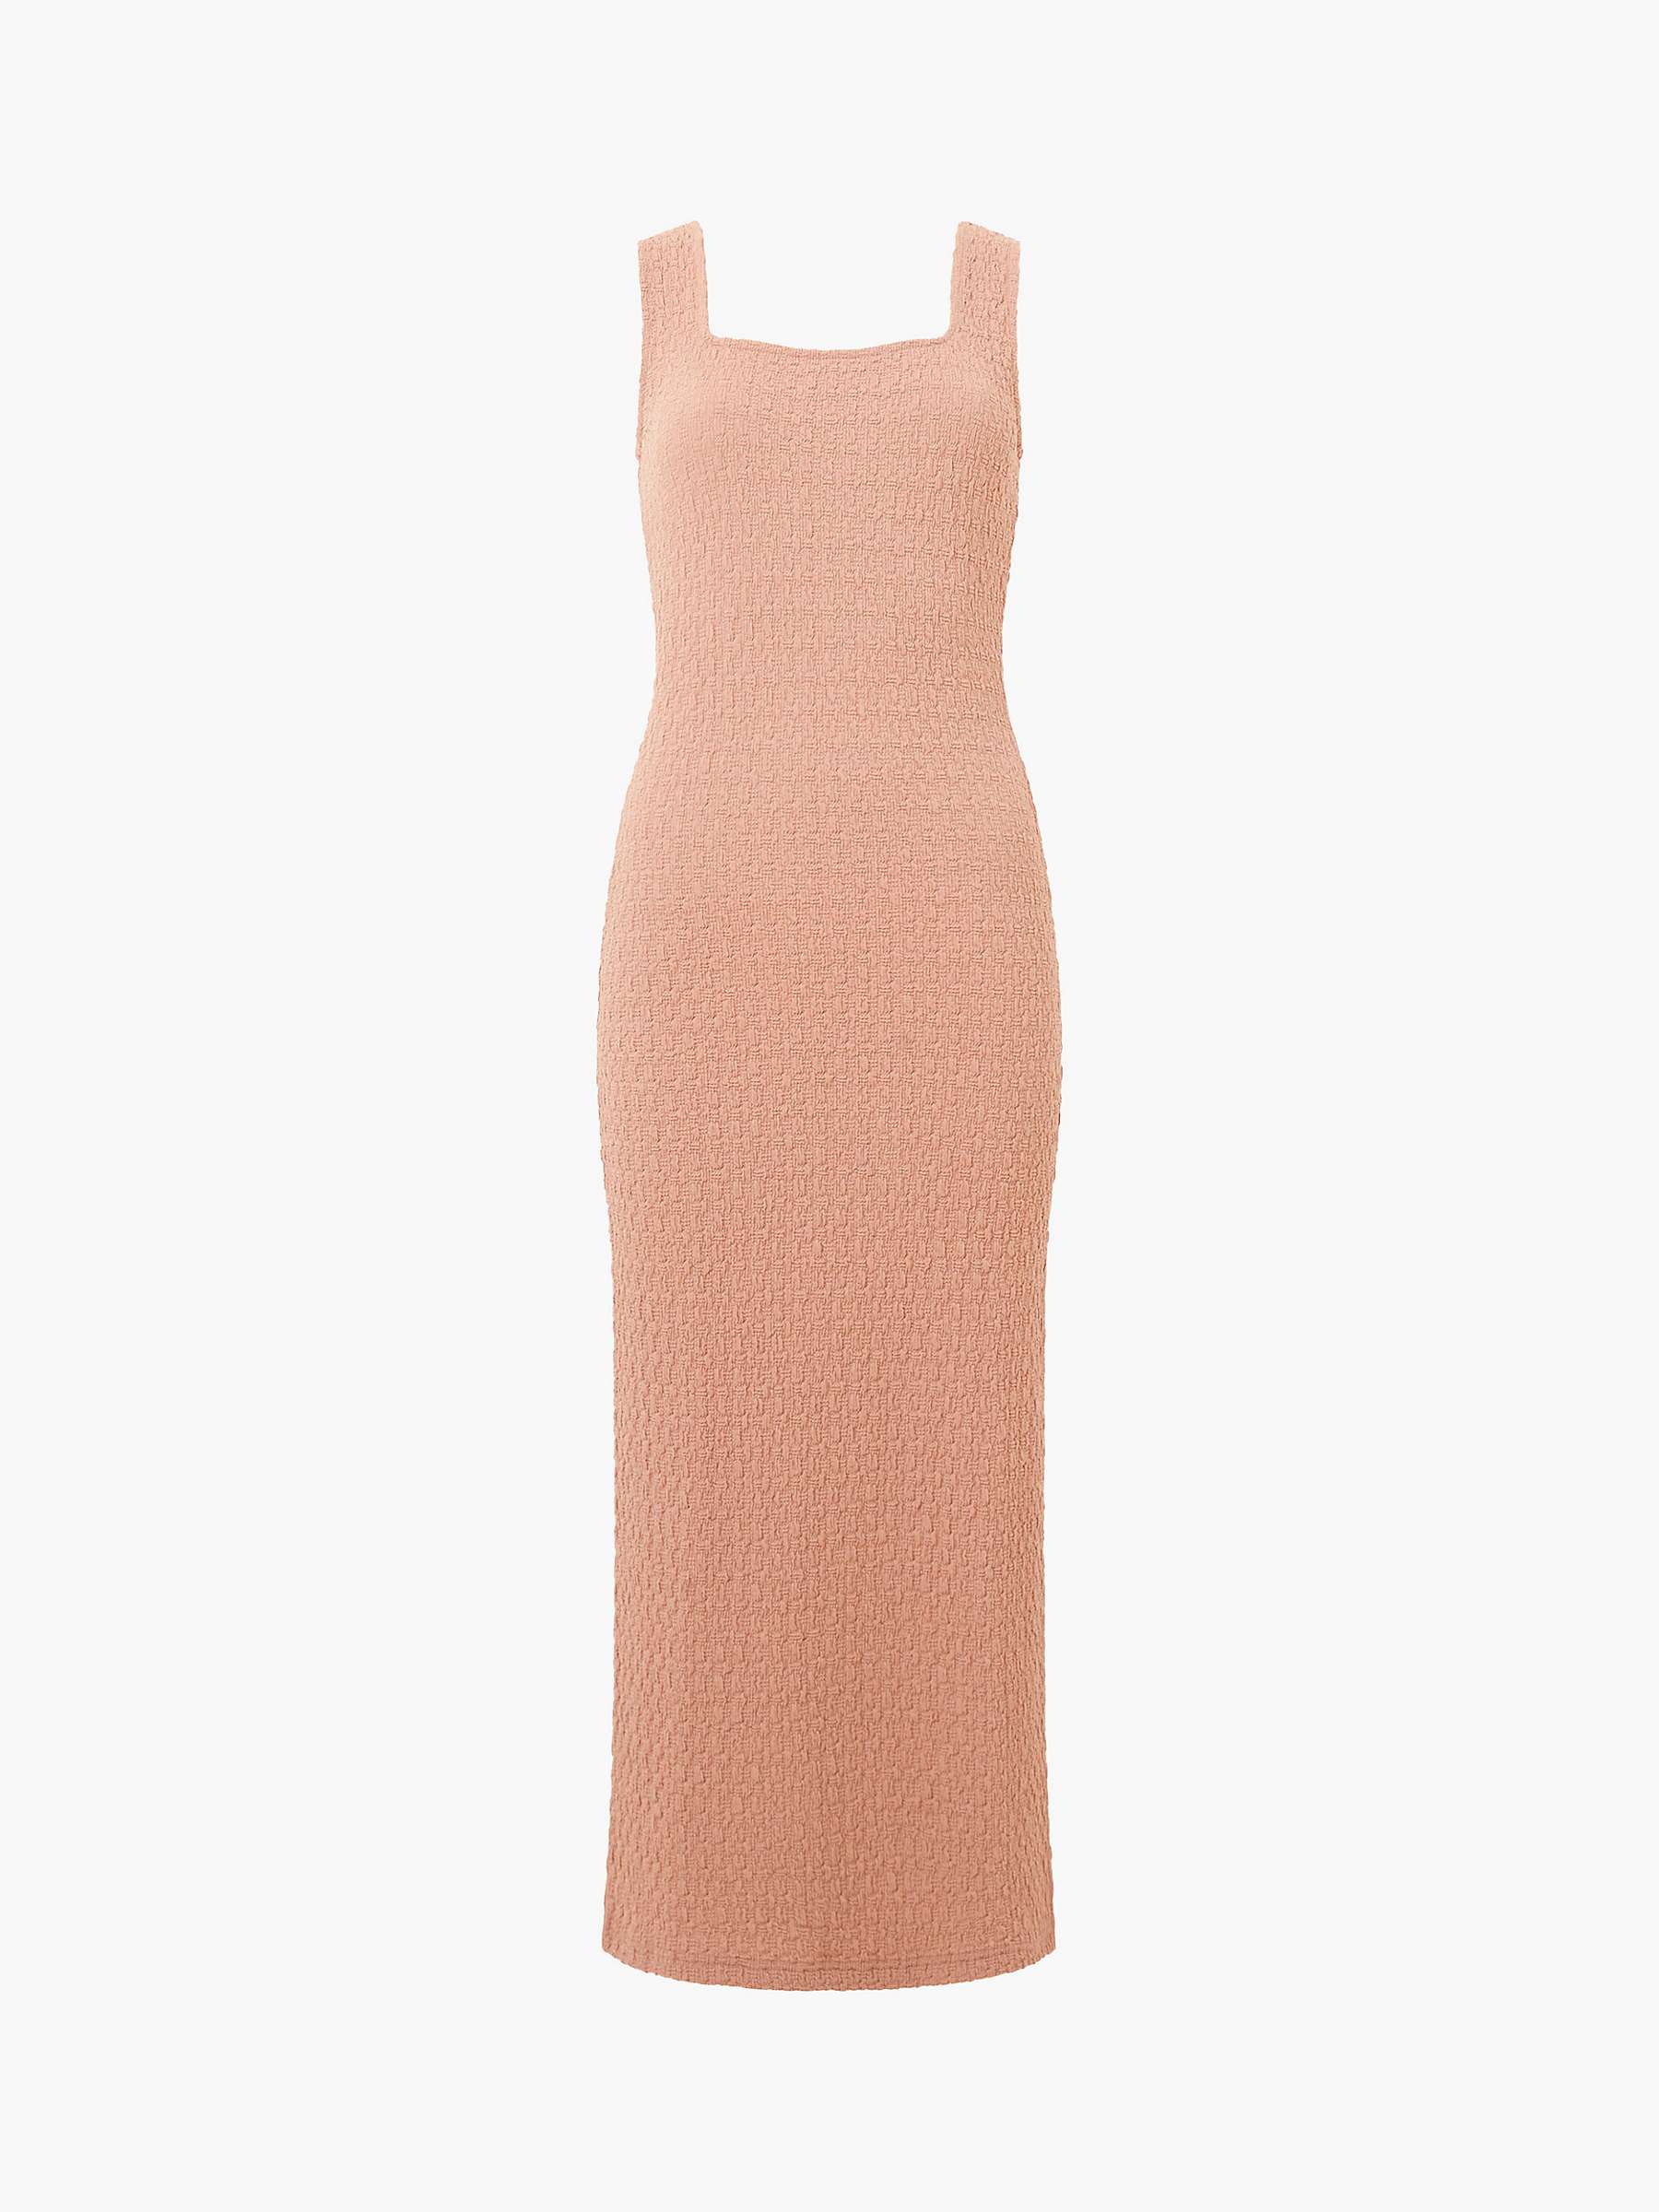 Buy French Connection Sadie Textured Bodycon Midi Dress, Mocha Mousse Online at johnlewis.com